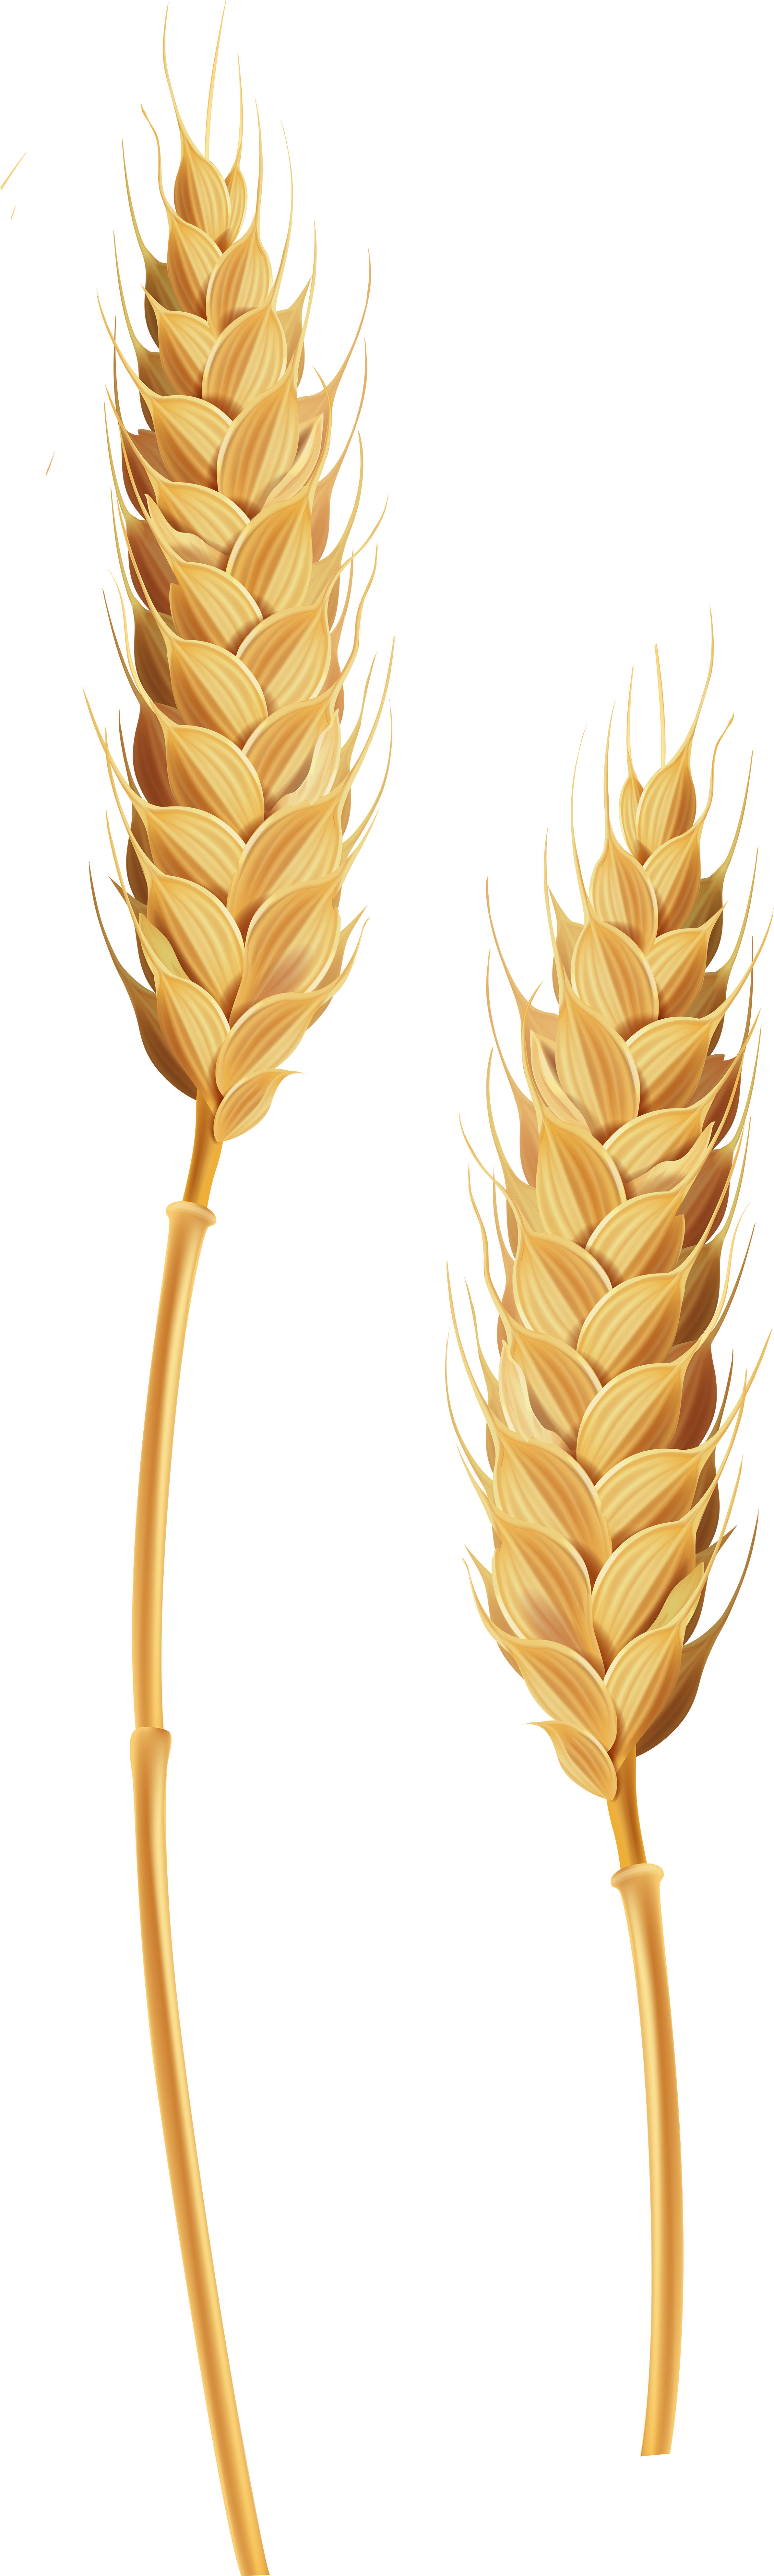 A Wheat Ear And Stalk